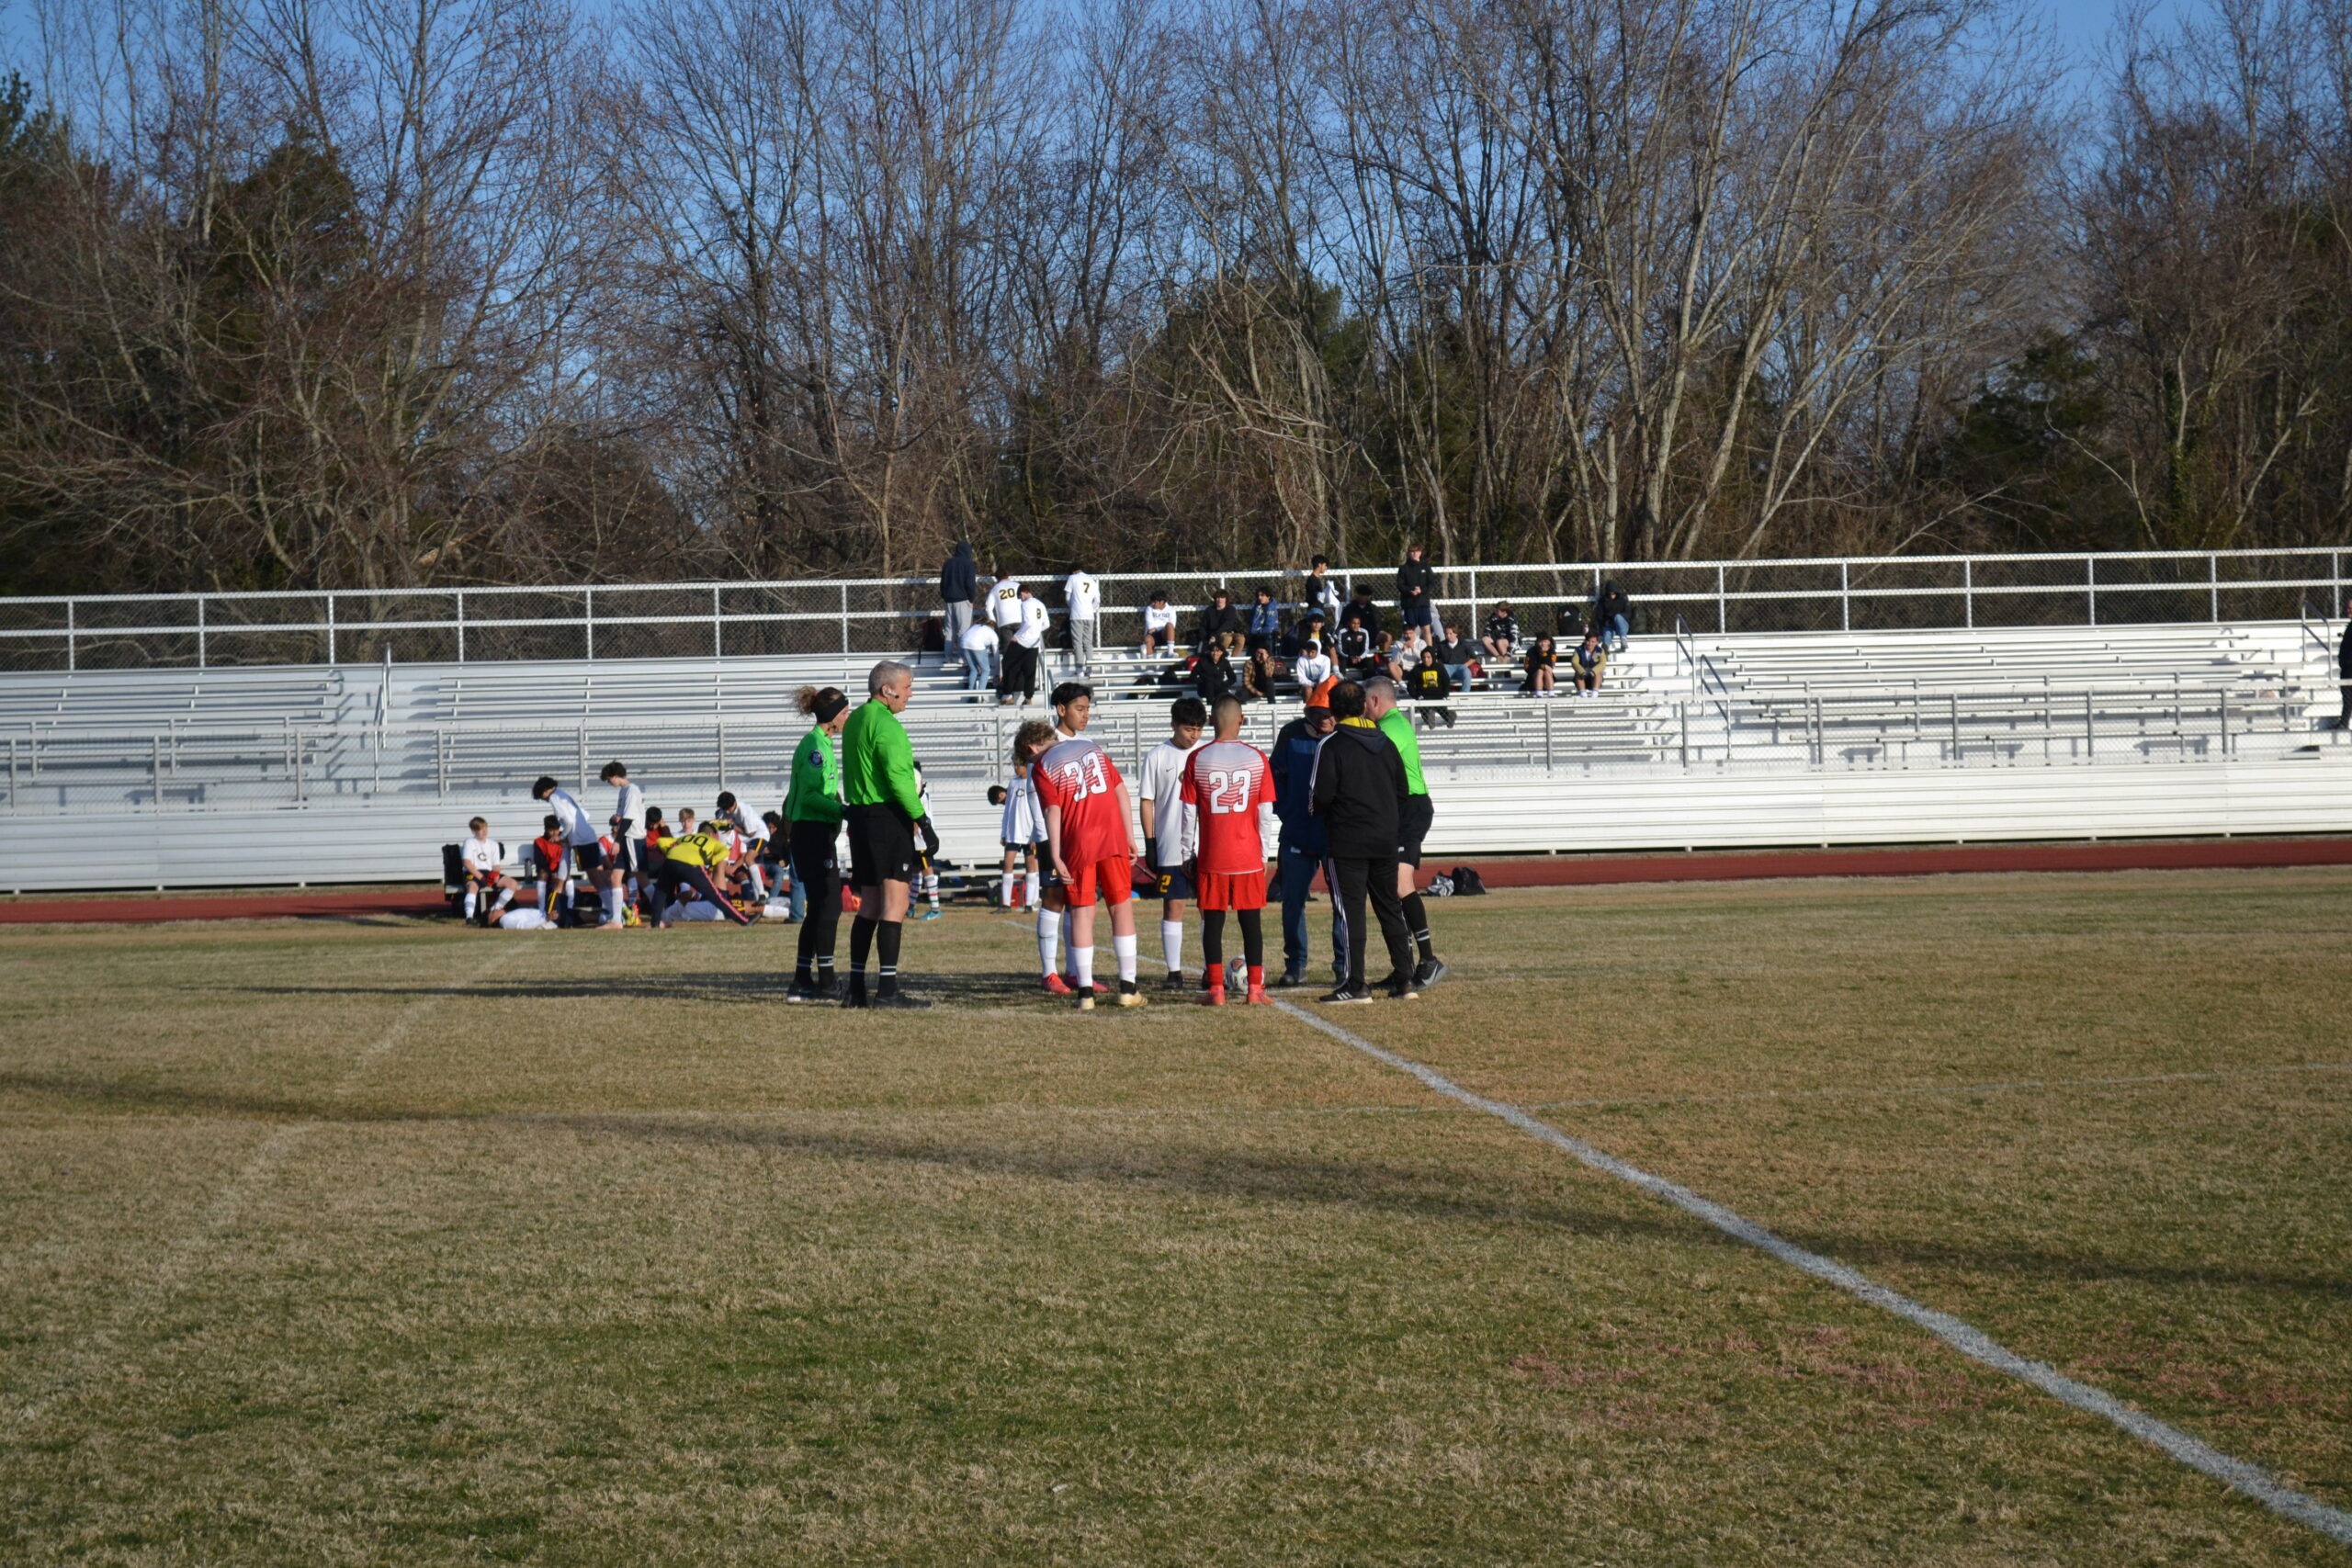 Boys Soccer JV scrimmage on March 5, 2022.